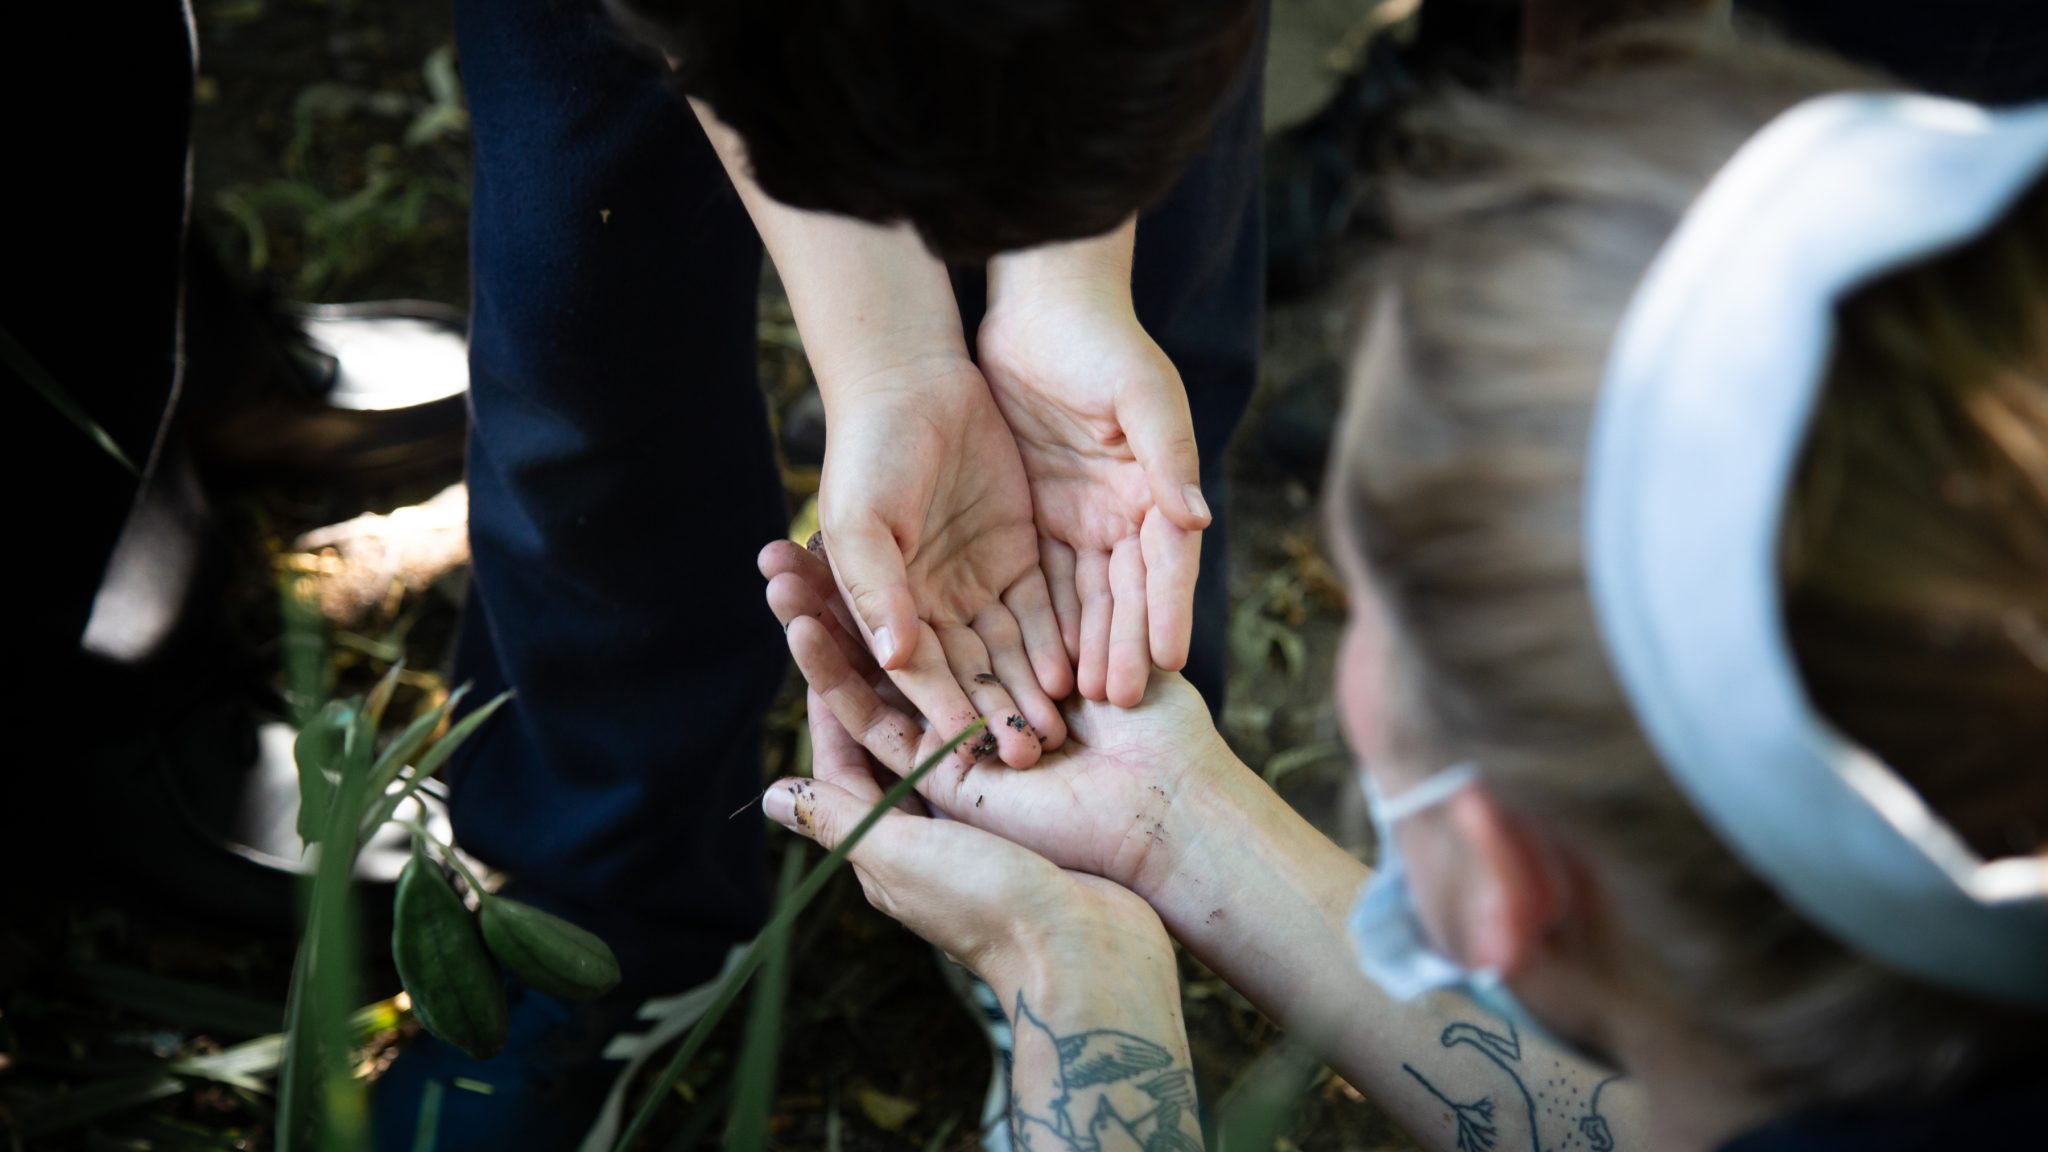 A child's hands opening into an adults hands at a nature club